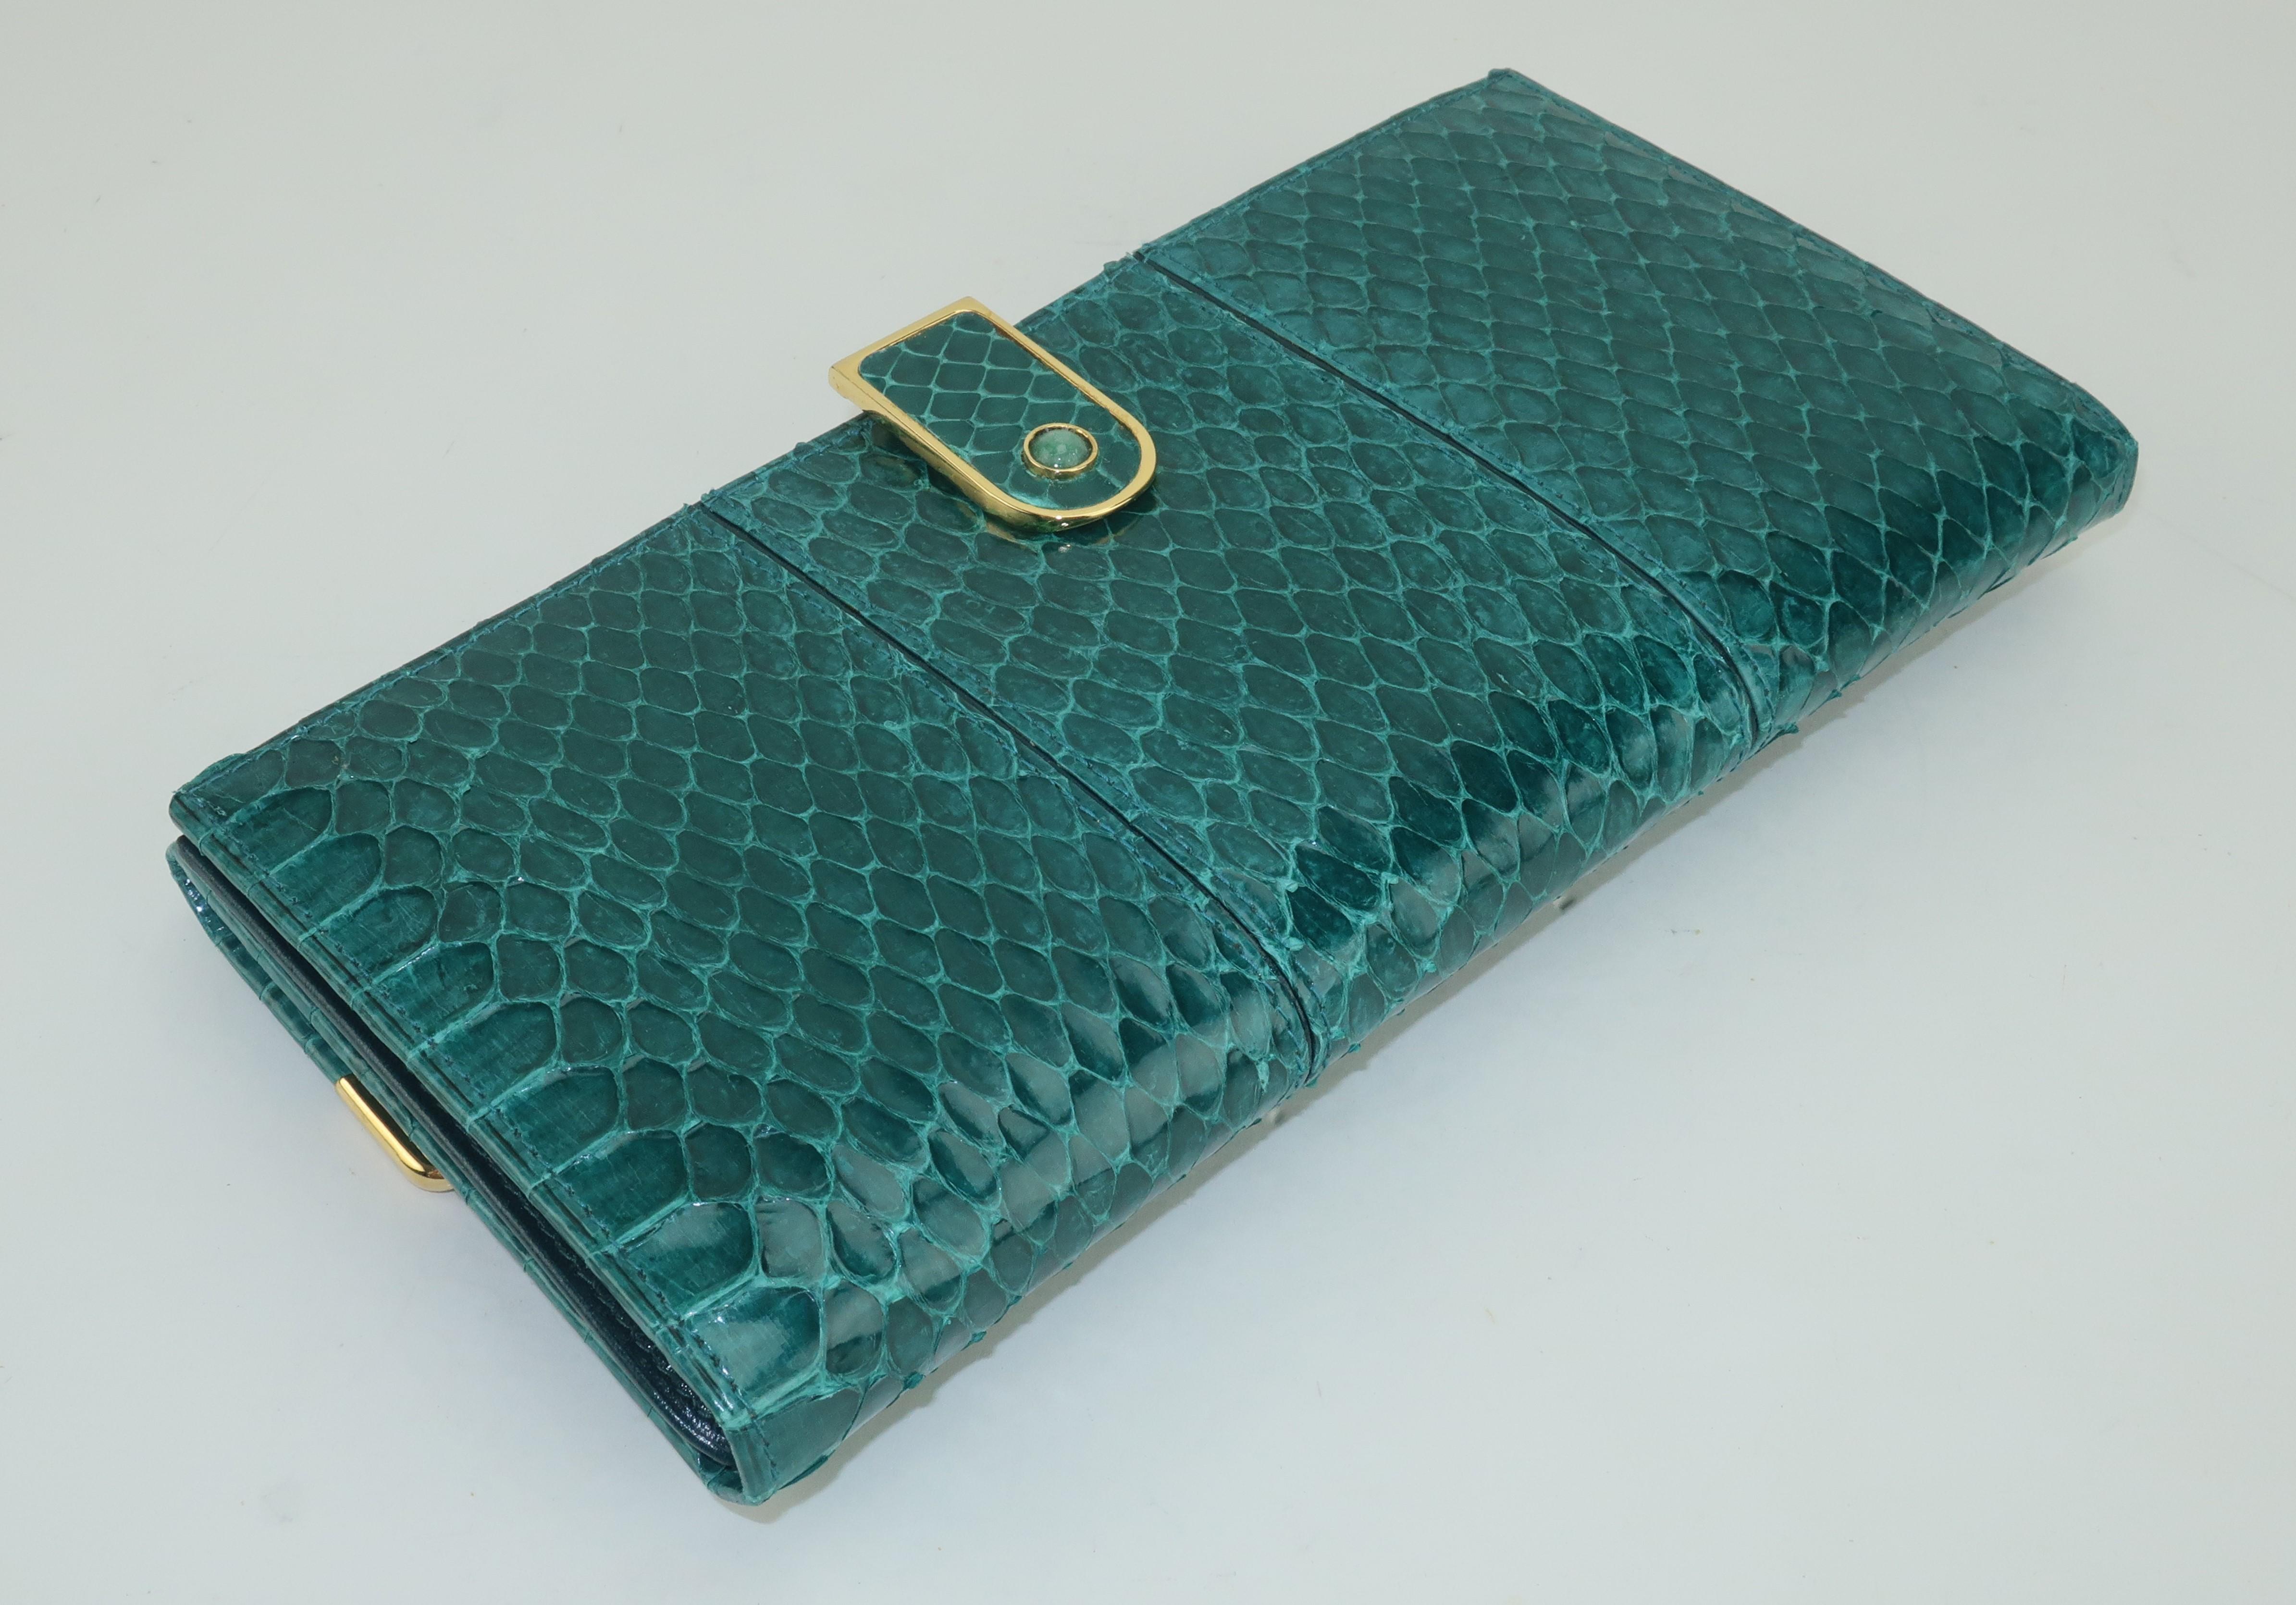 Beautiful Judith Leiber green snakeskin wallet with deep green leather lined interior and gold metal hardware accented with semi precious stones.  The interior opens on one side with a hinged clip and reveals two bill size compartments and a